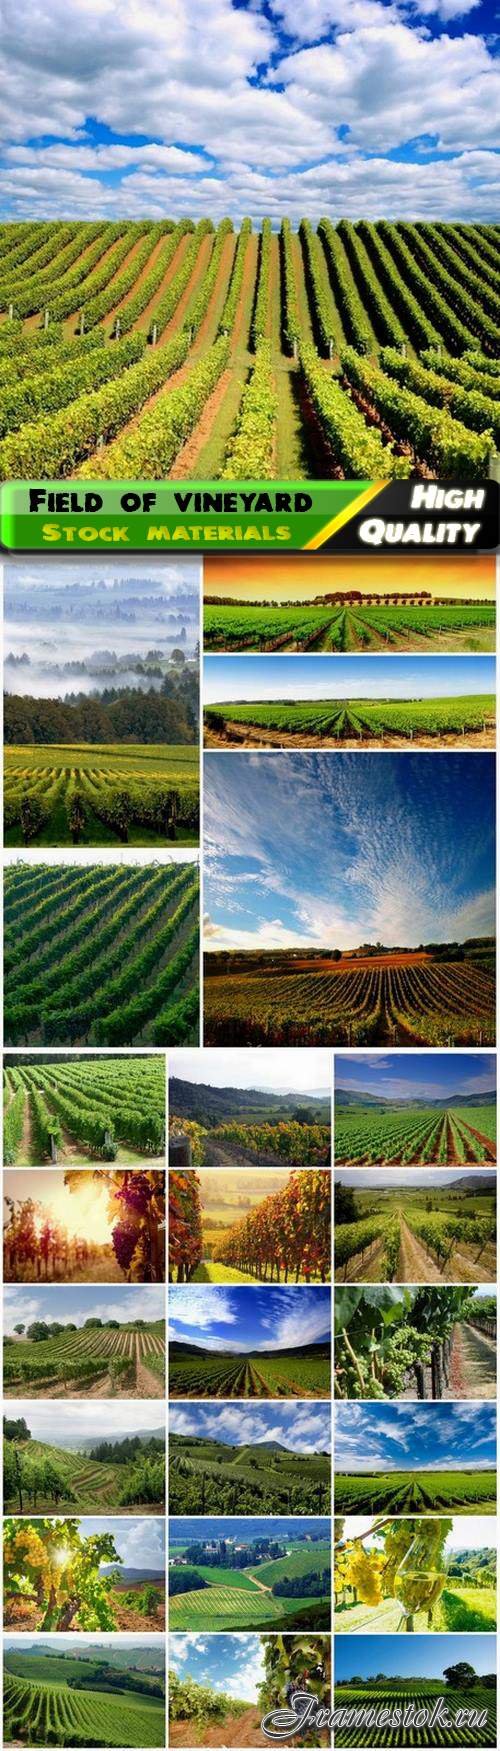 Nature landscape with field of vineyard - 25 HQ Jpg